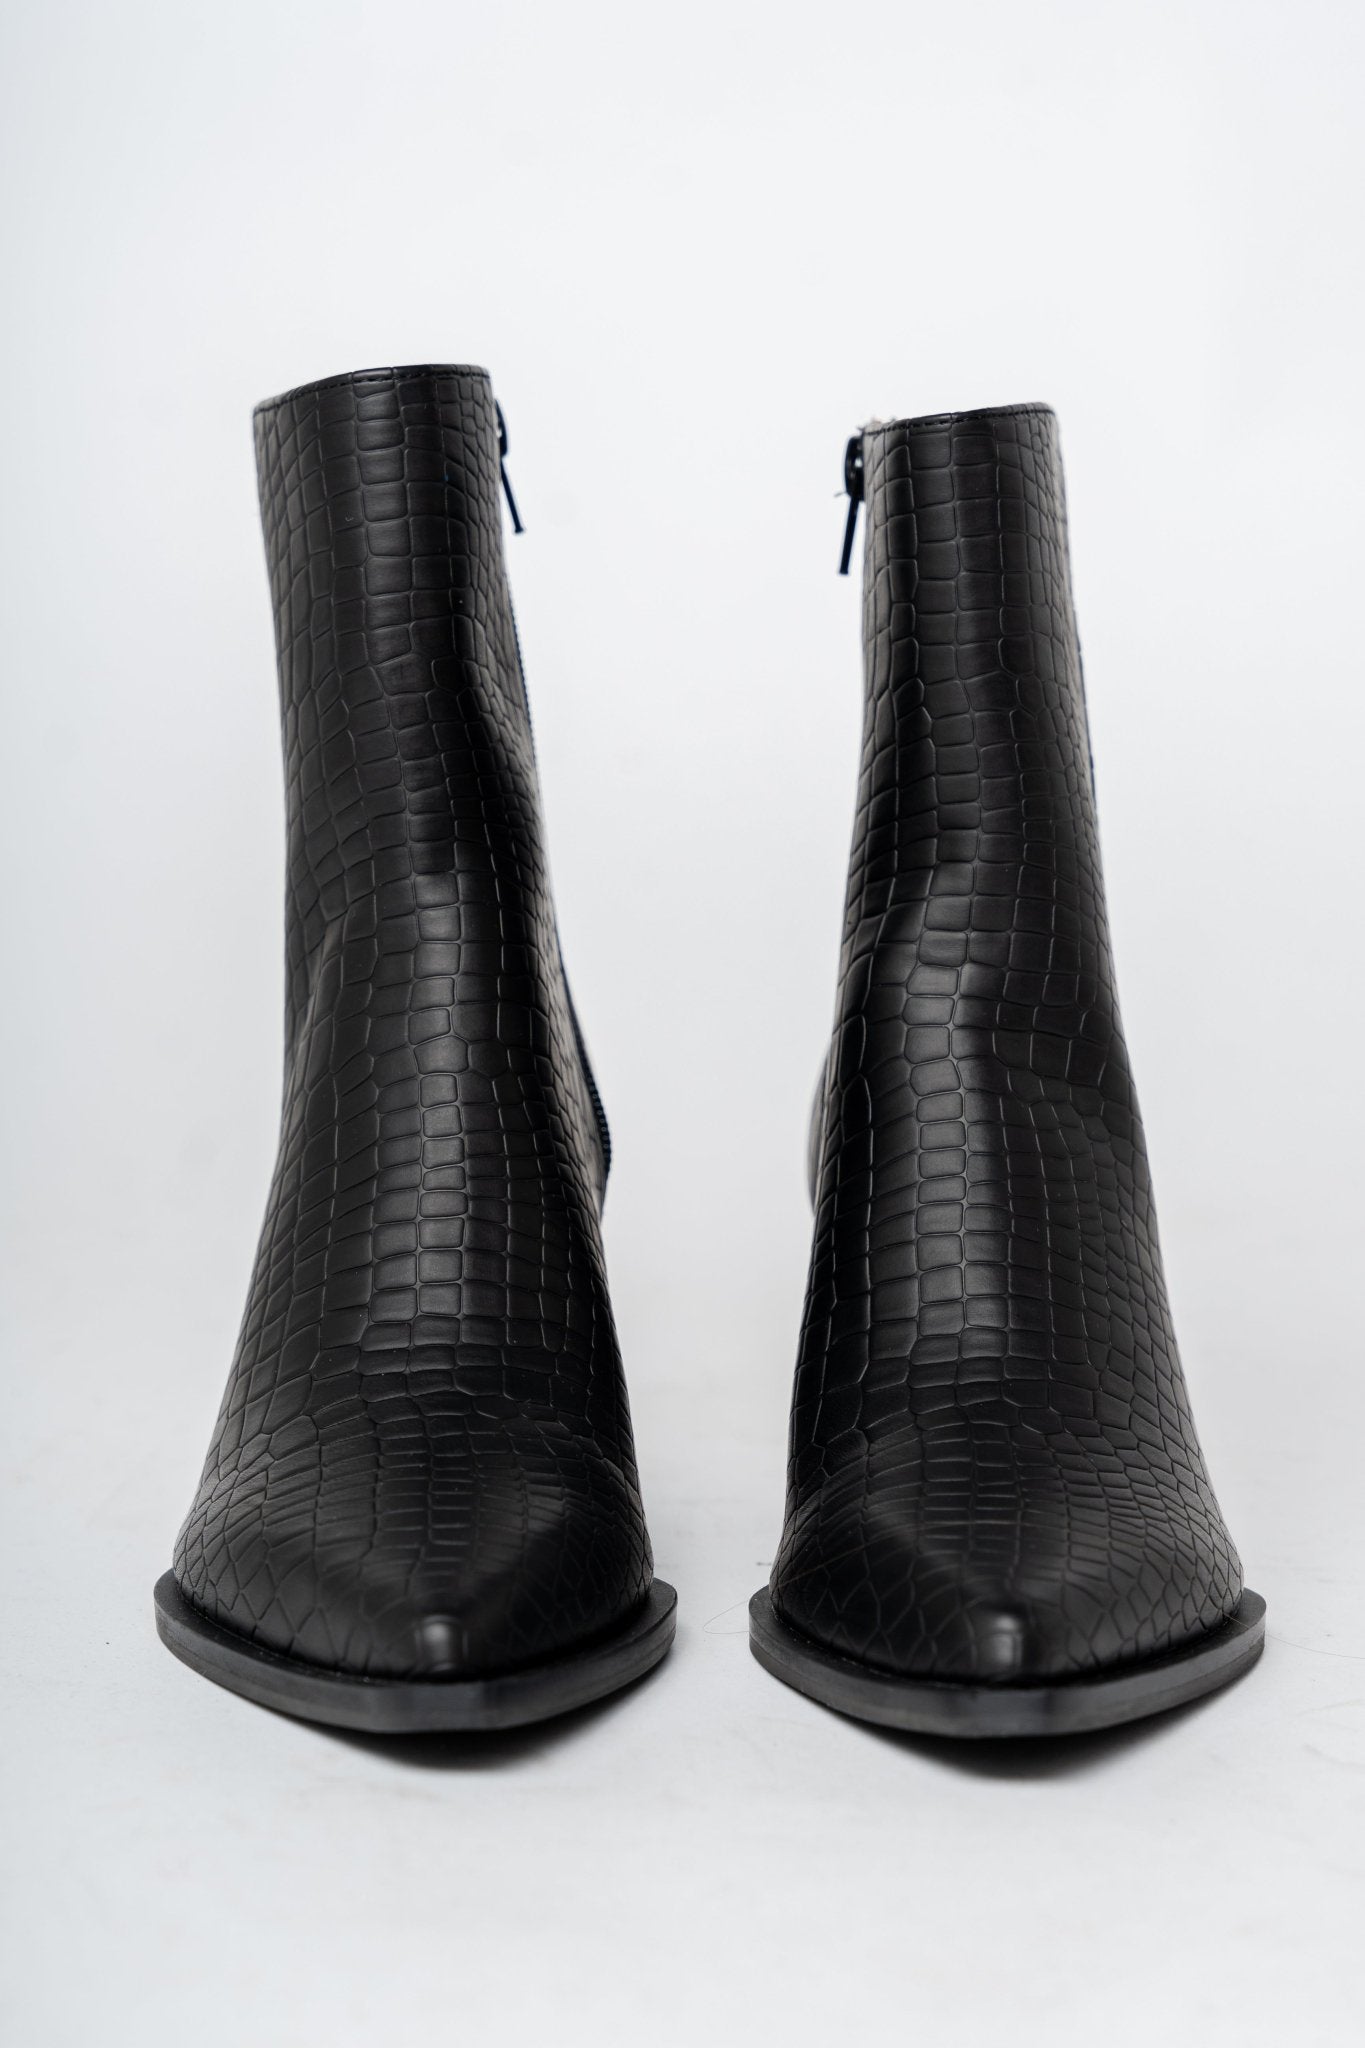 Miley alligator bootie black - Trendy shoes - Fashion Shoes at Lush Fashion Lounge Boutique in Oklahoma City